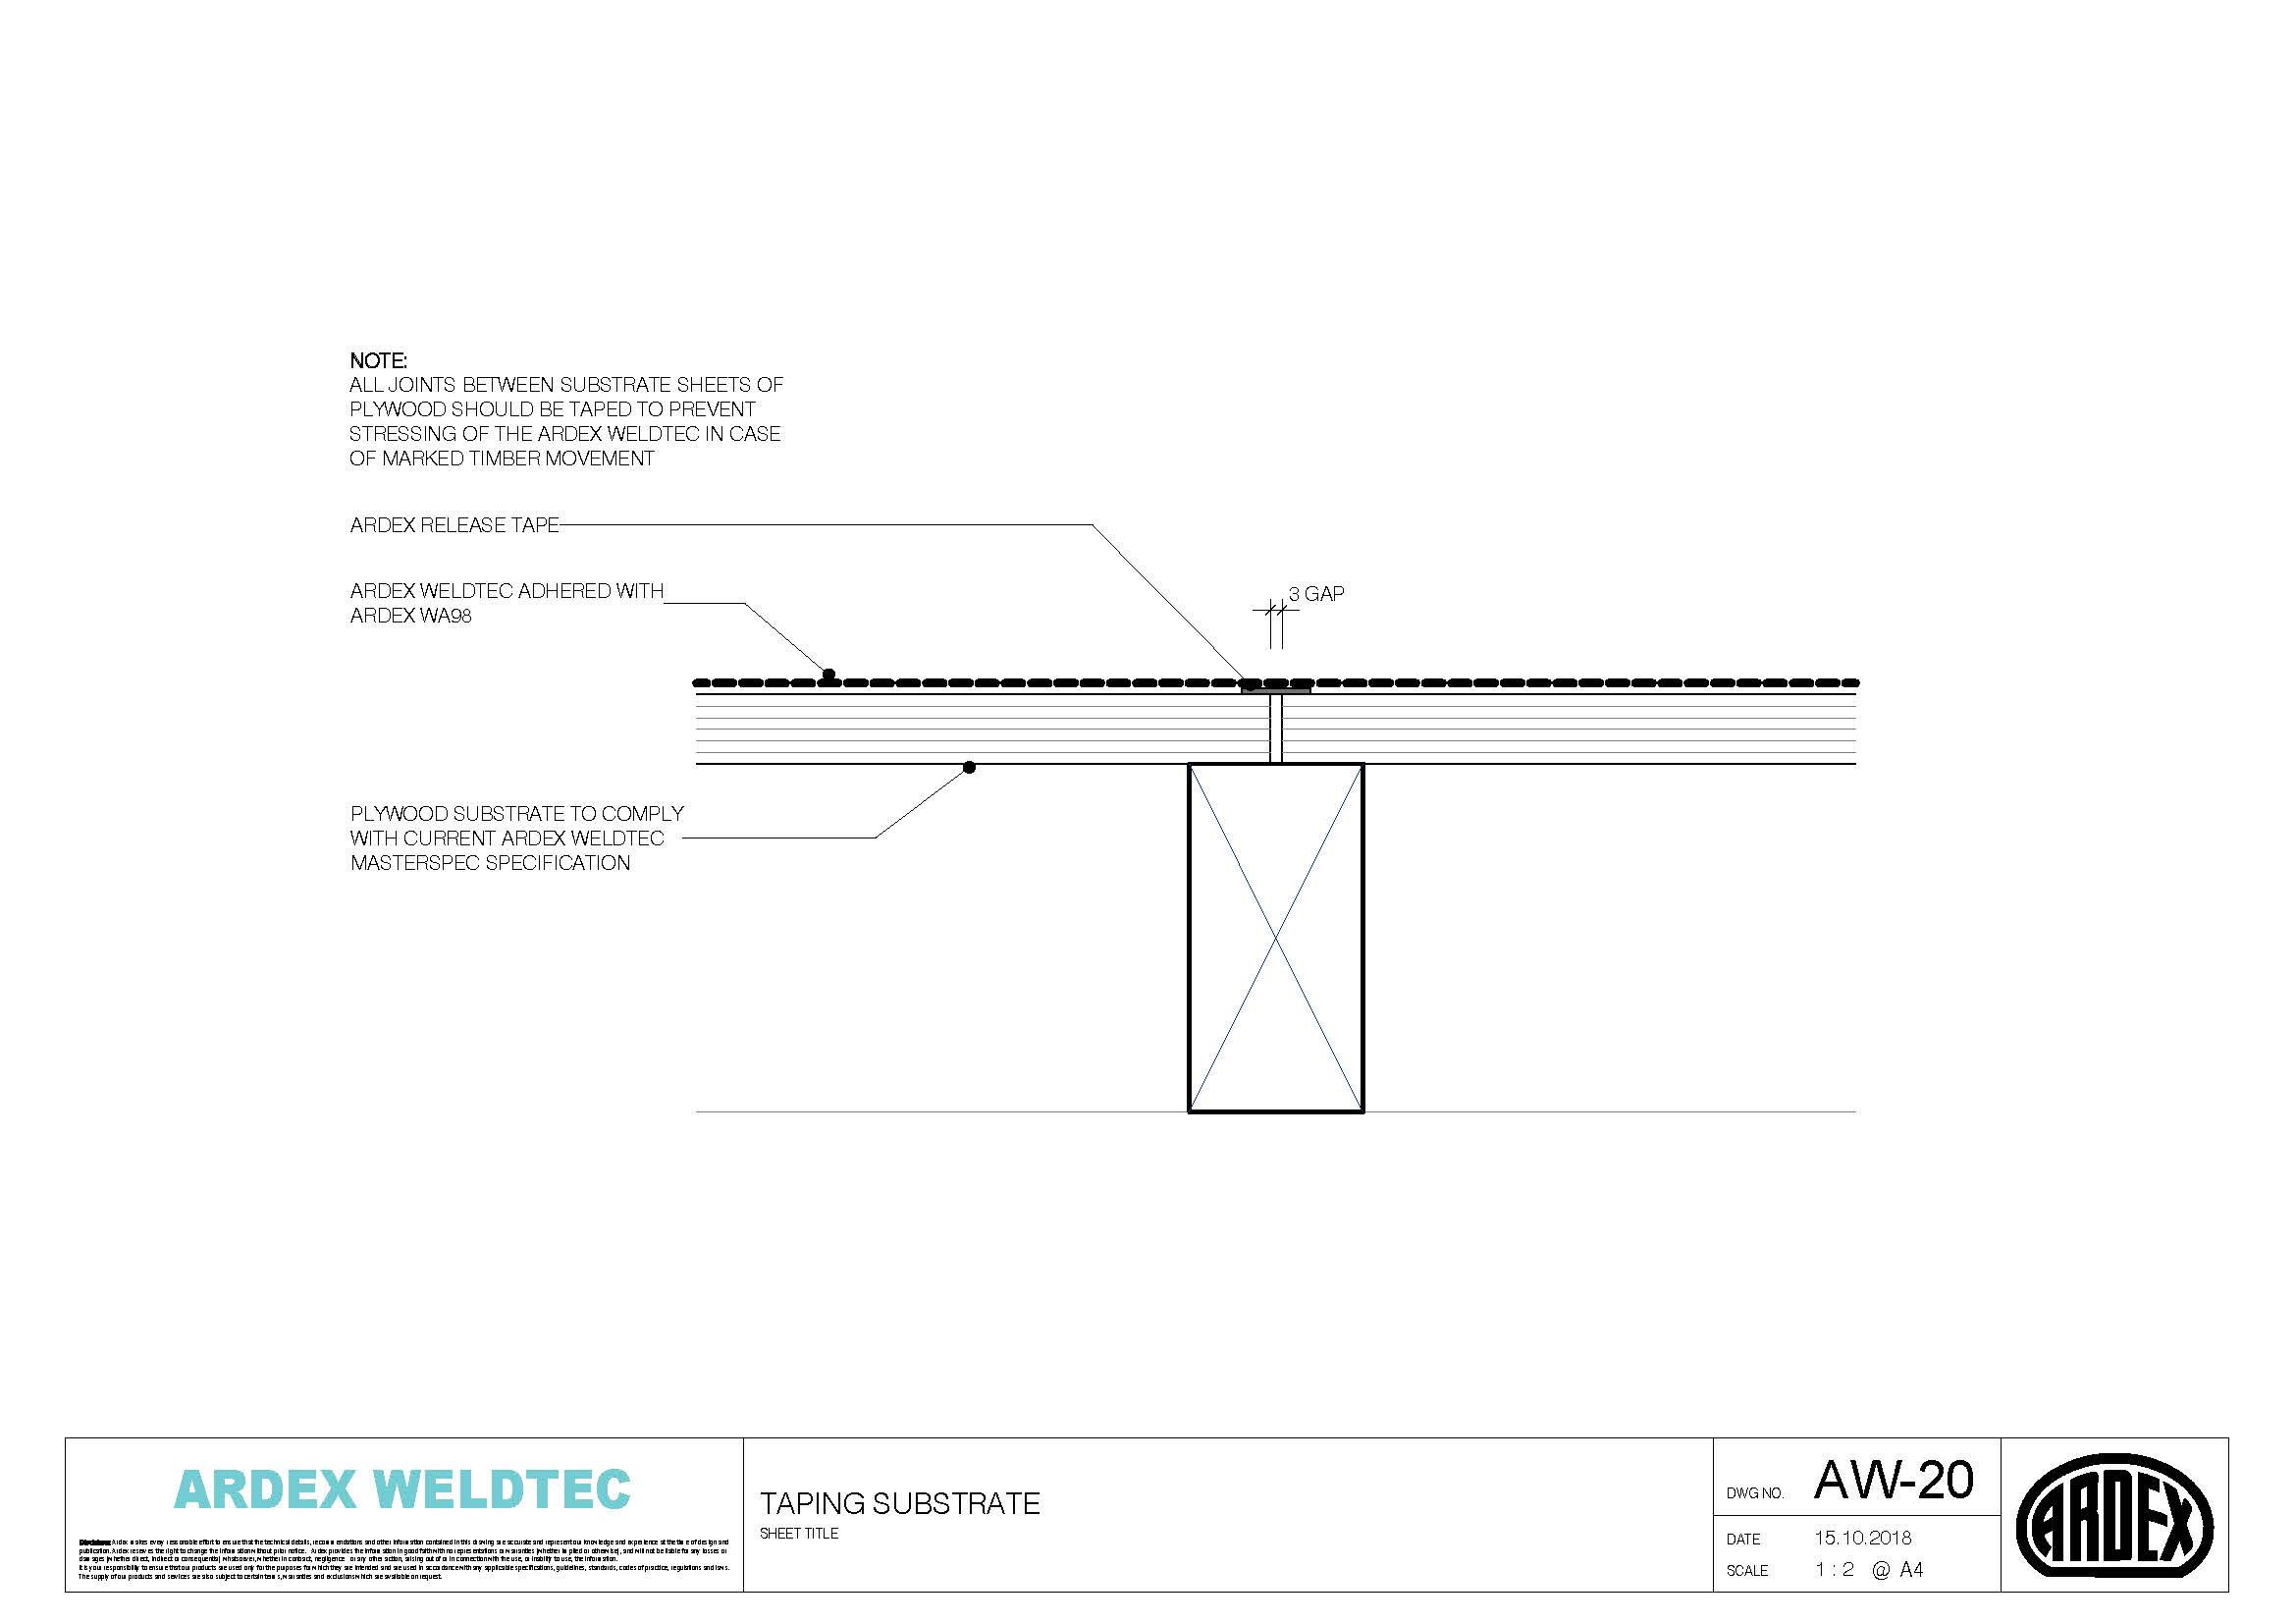 Weldtec taping substrate